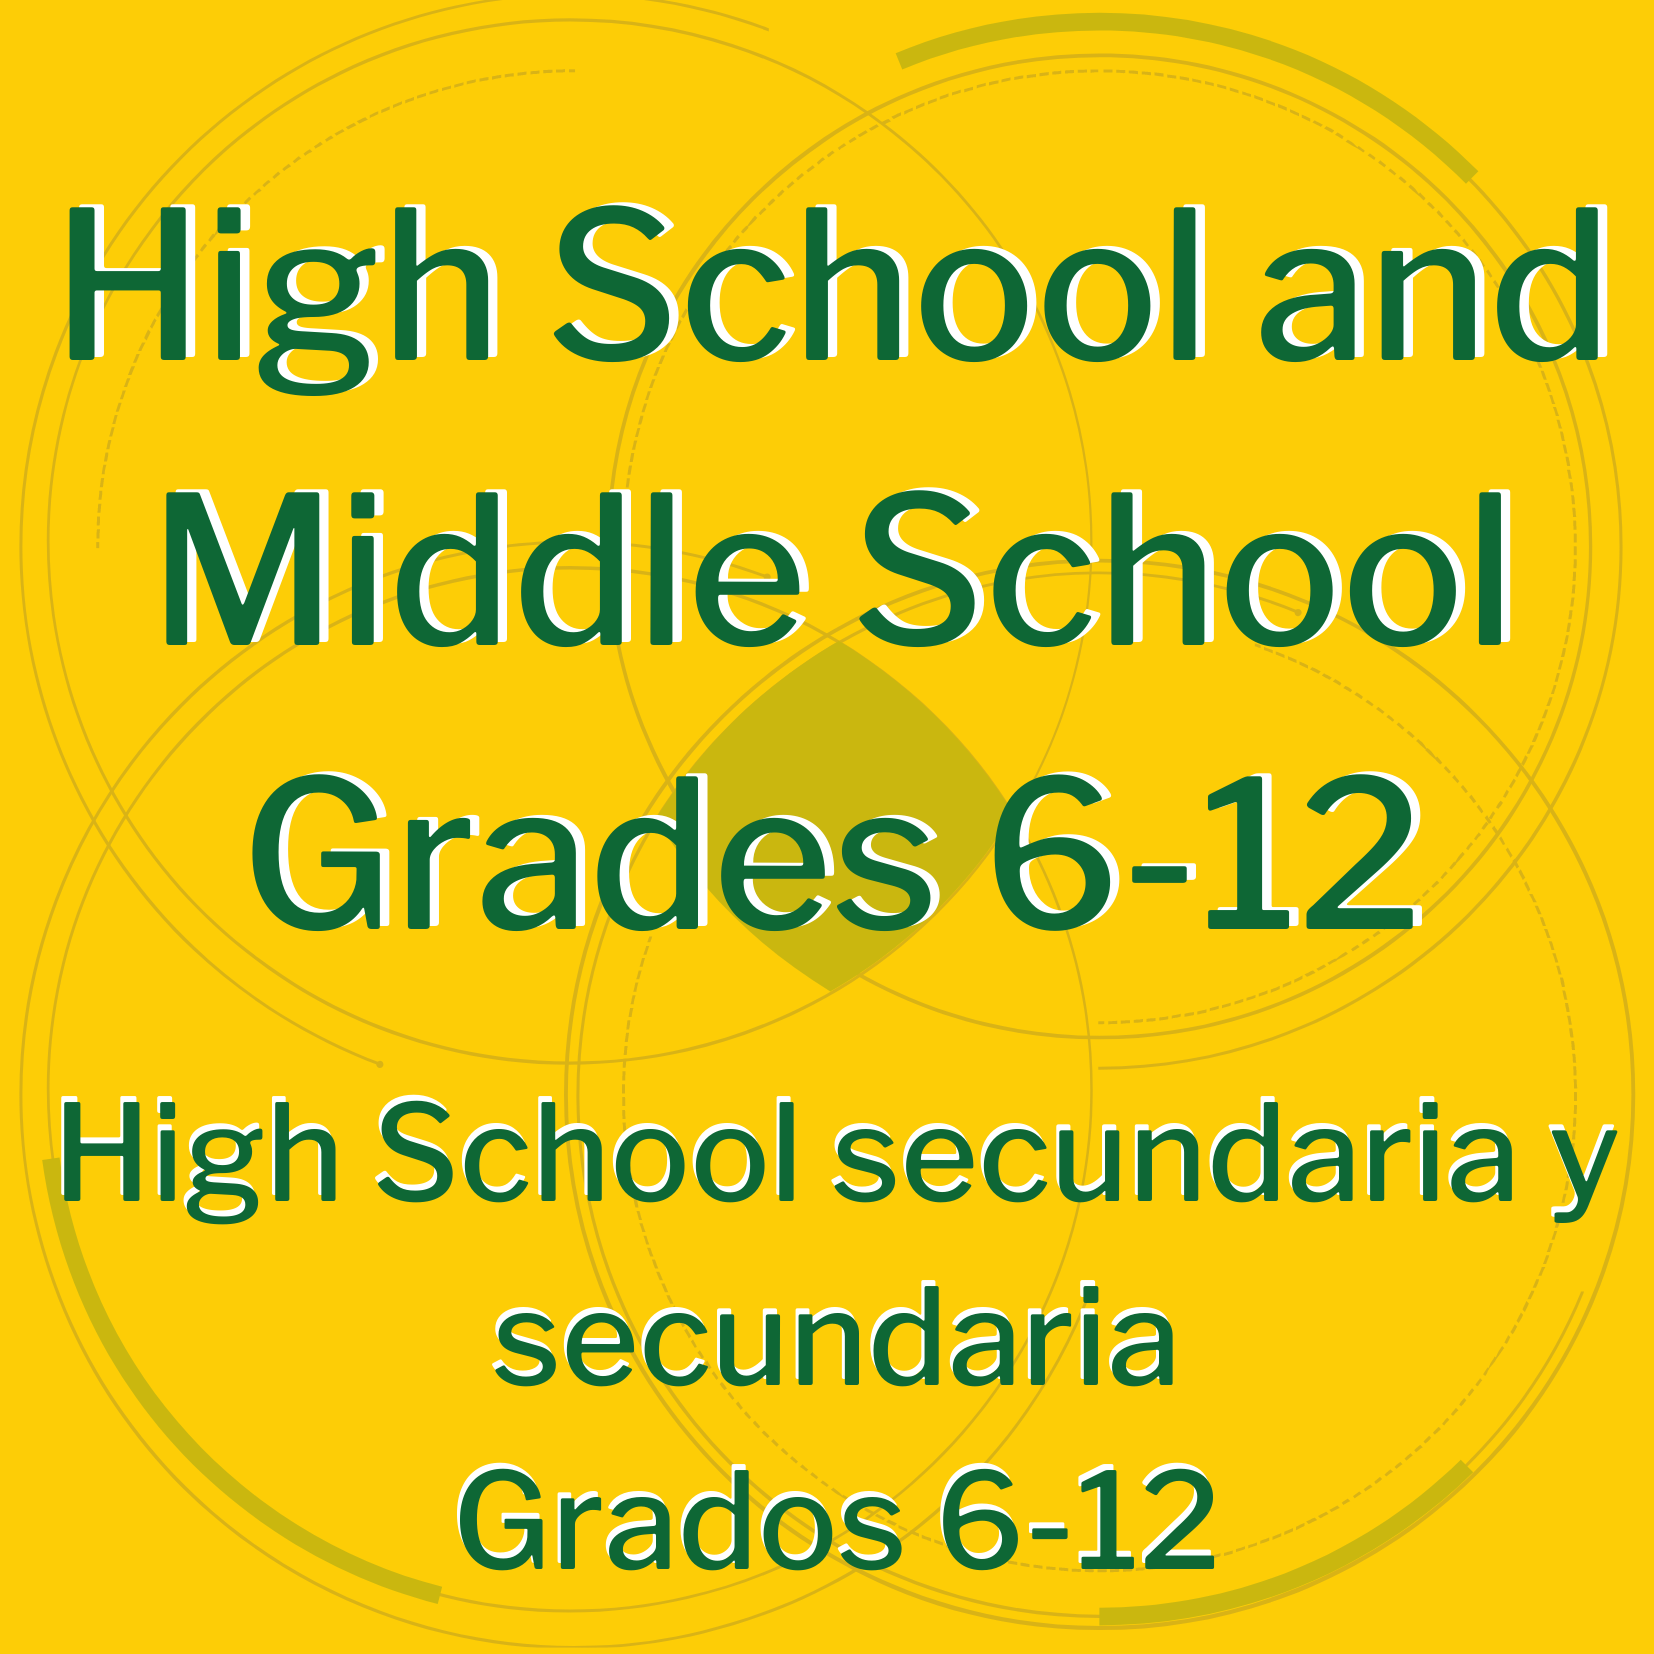 High School and Middle School Grades 6-12